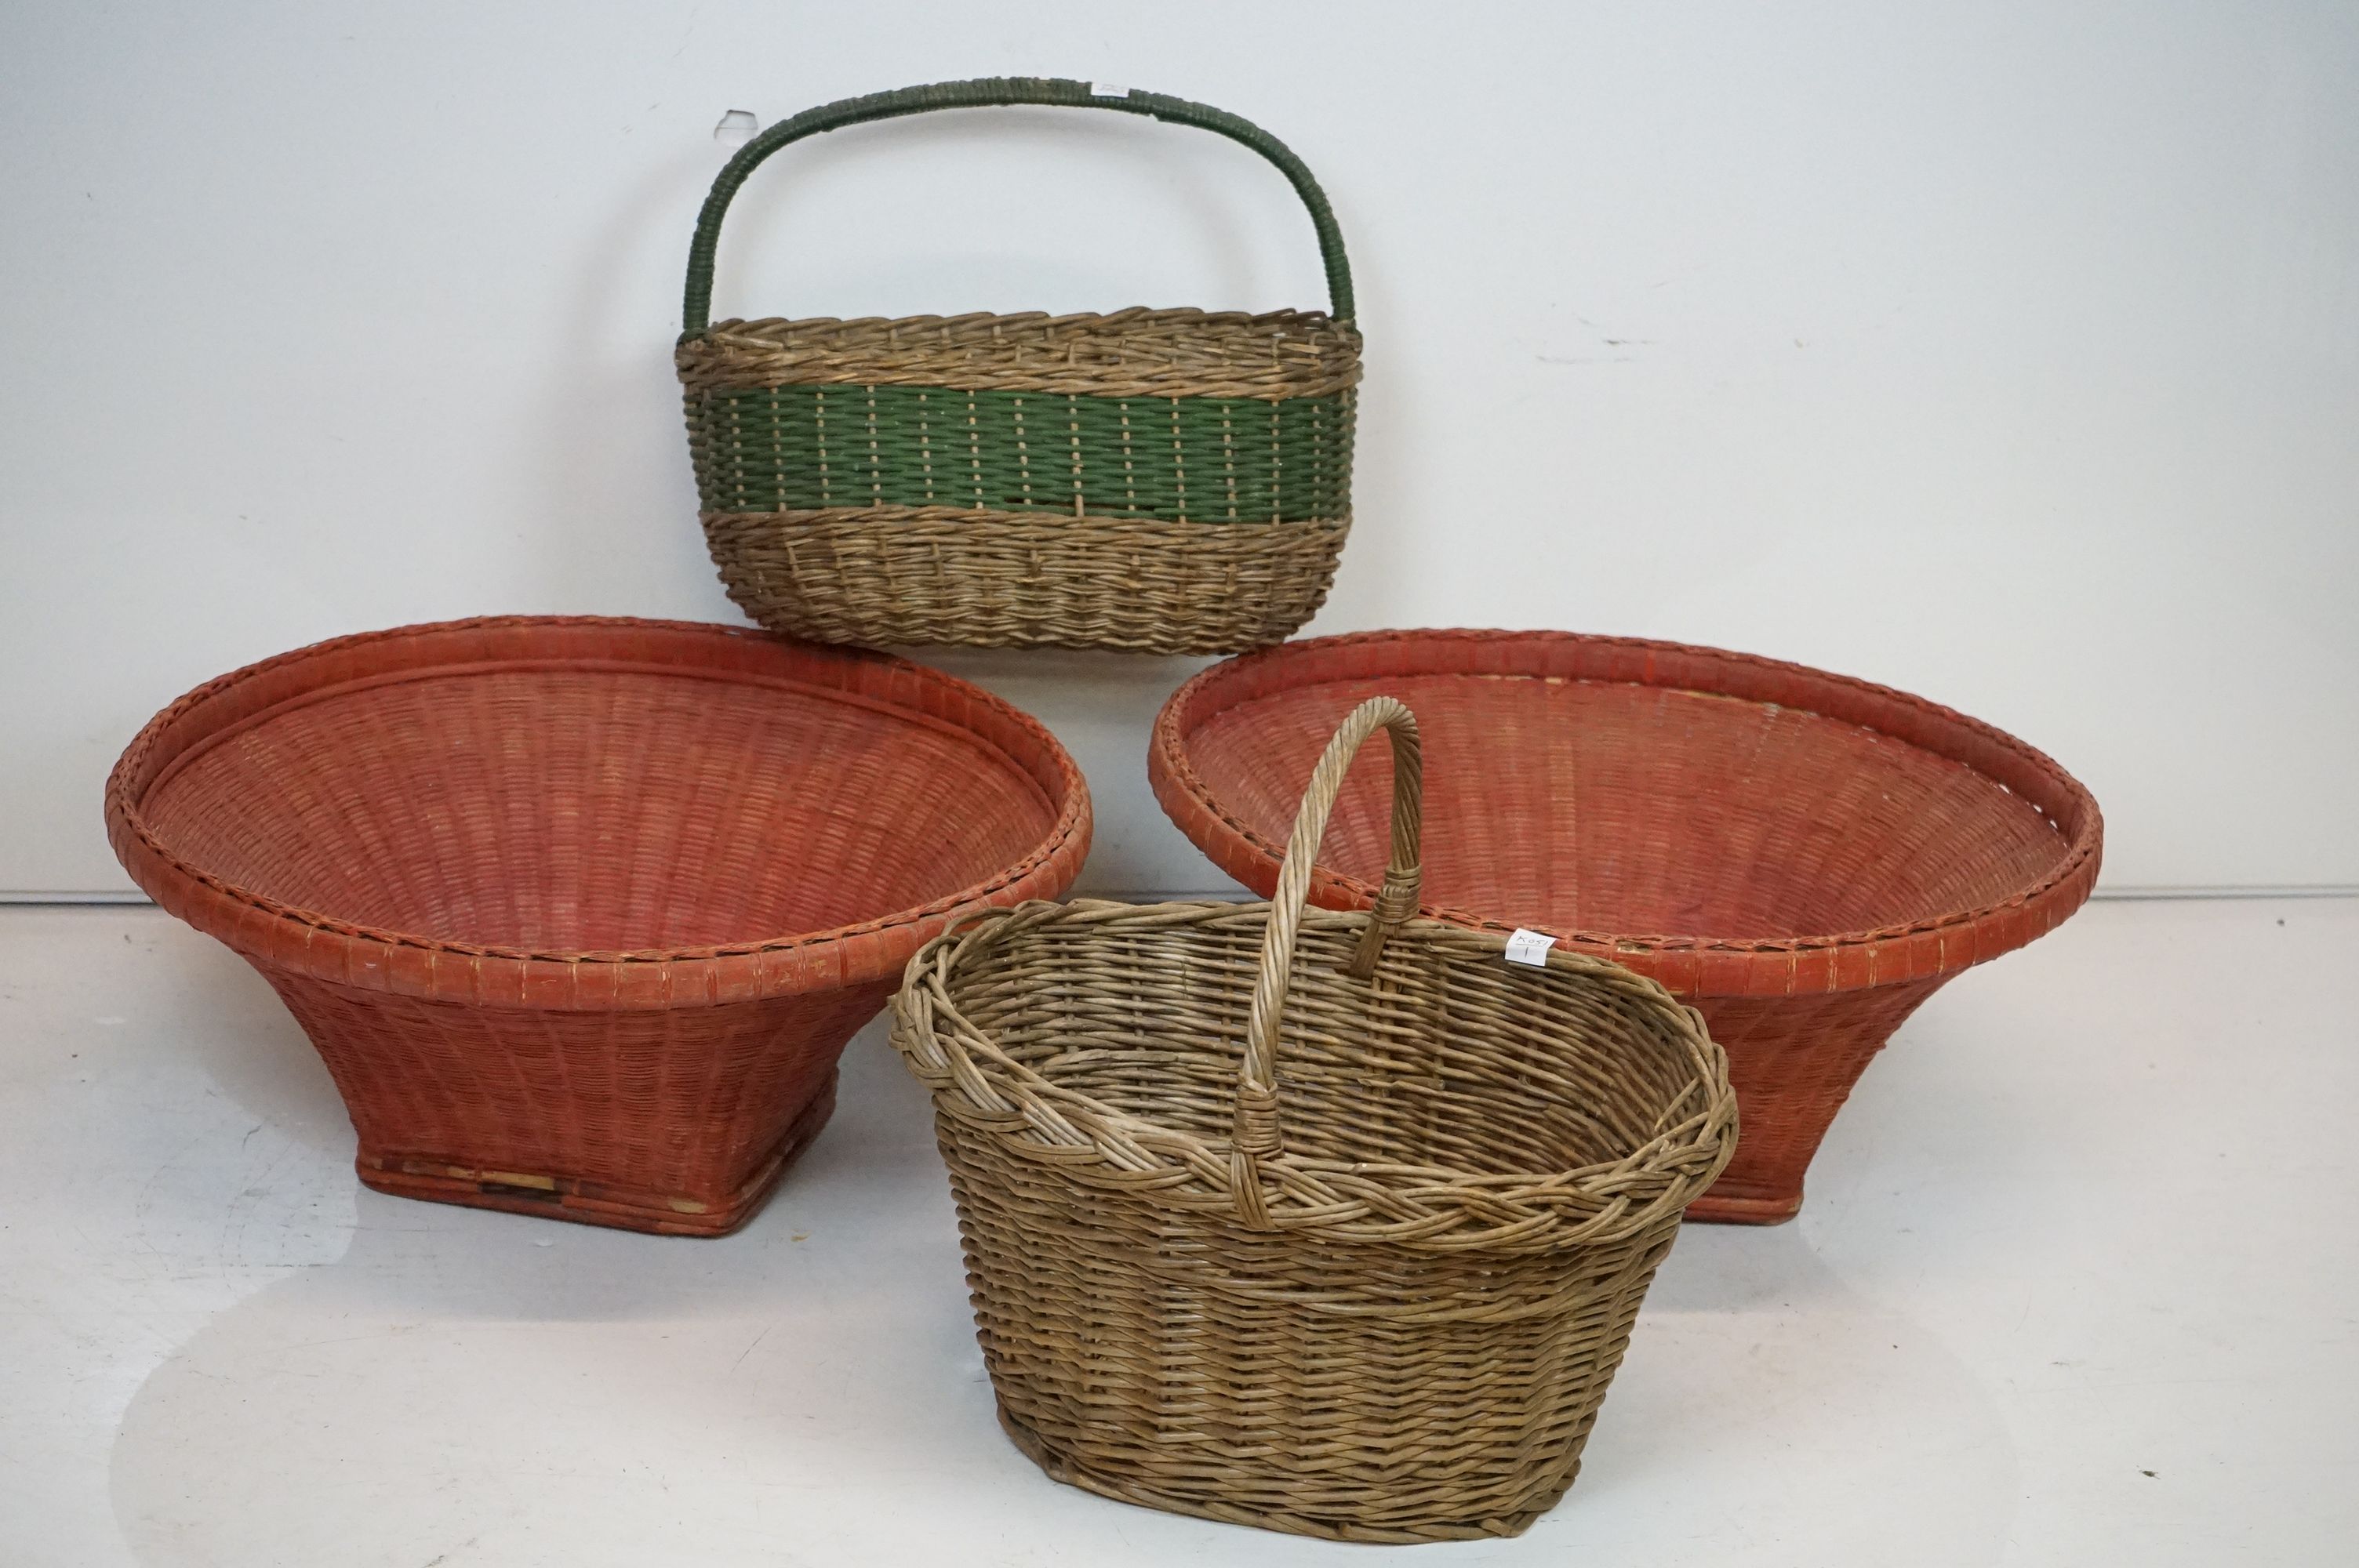 A collection of 4 vintage wicker baskets.